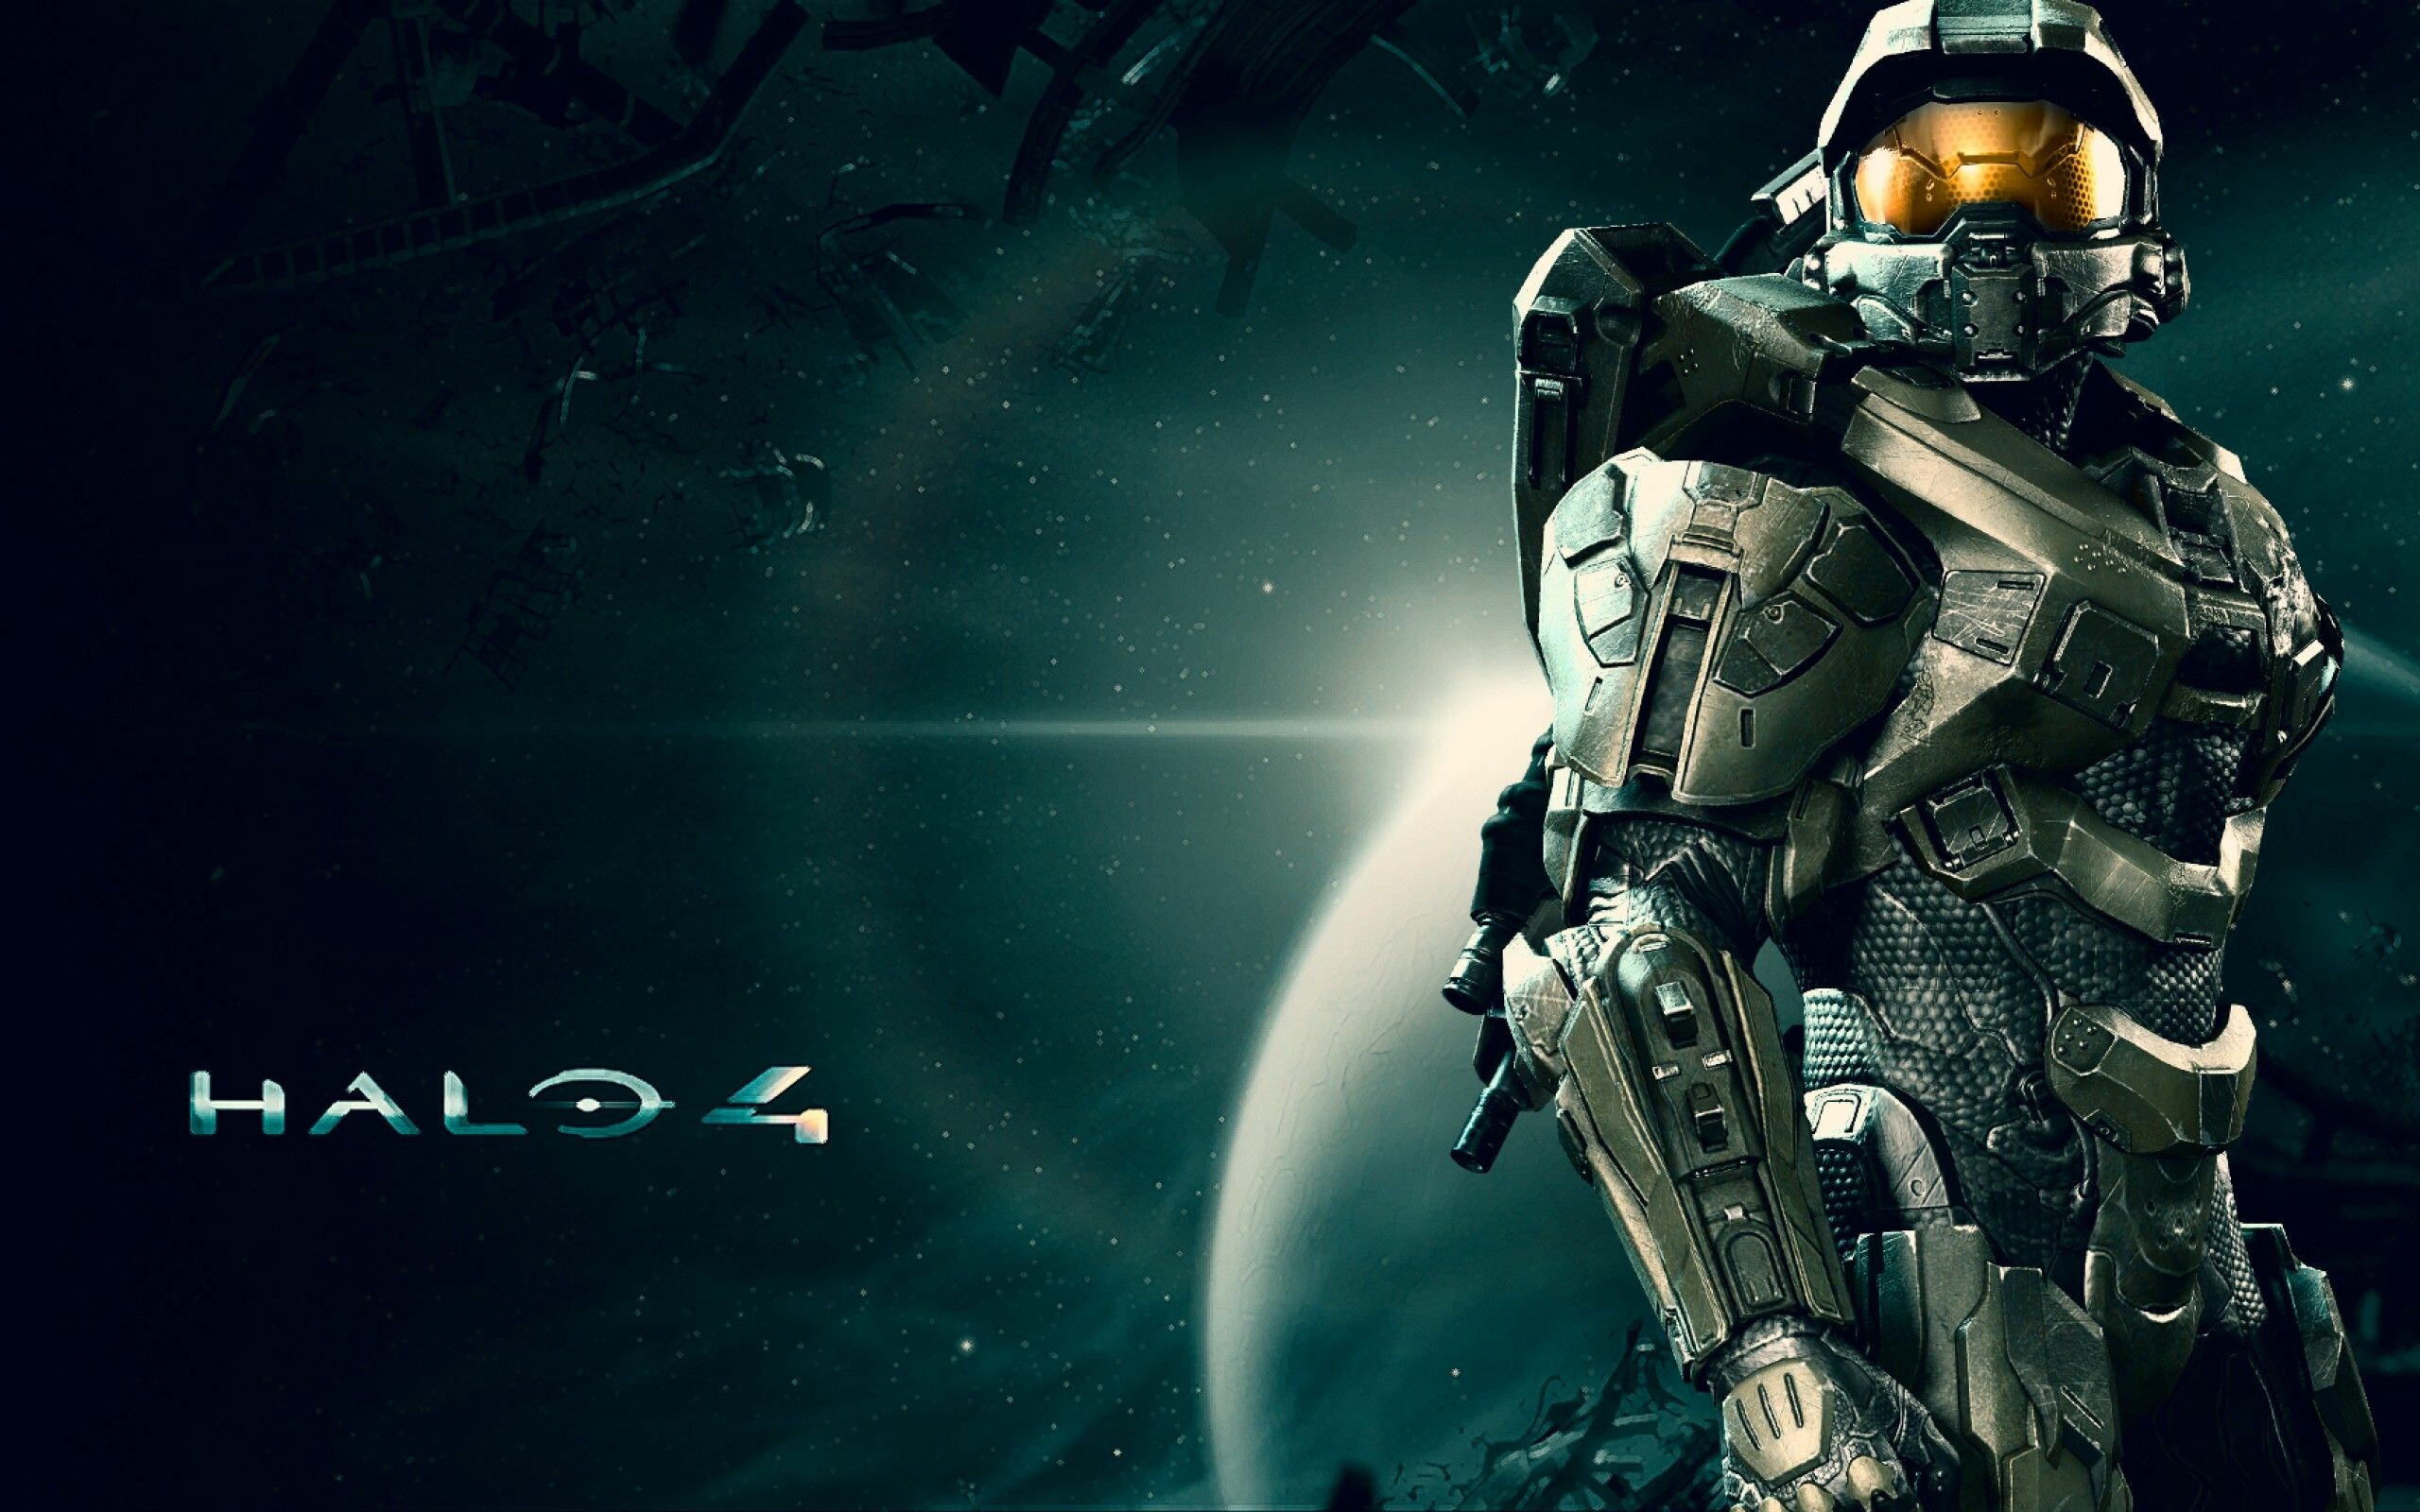 Download Halo wallpapers for mobile phone free Halo HD pictures